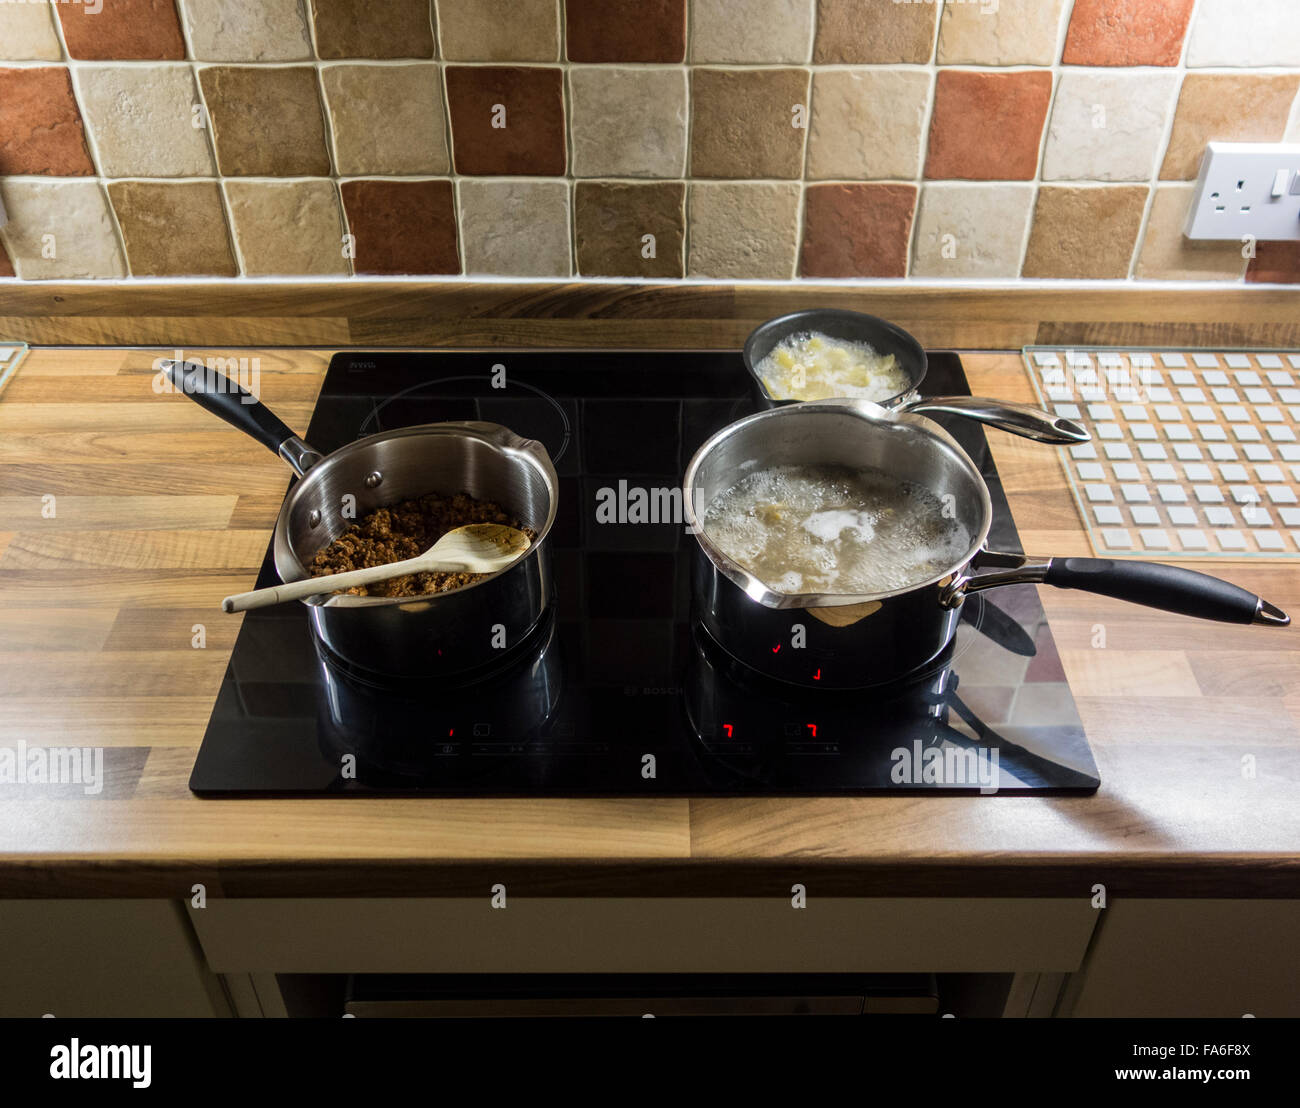 Pasta and sauce being cooked on an induction hob. Stock Photo